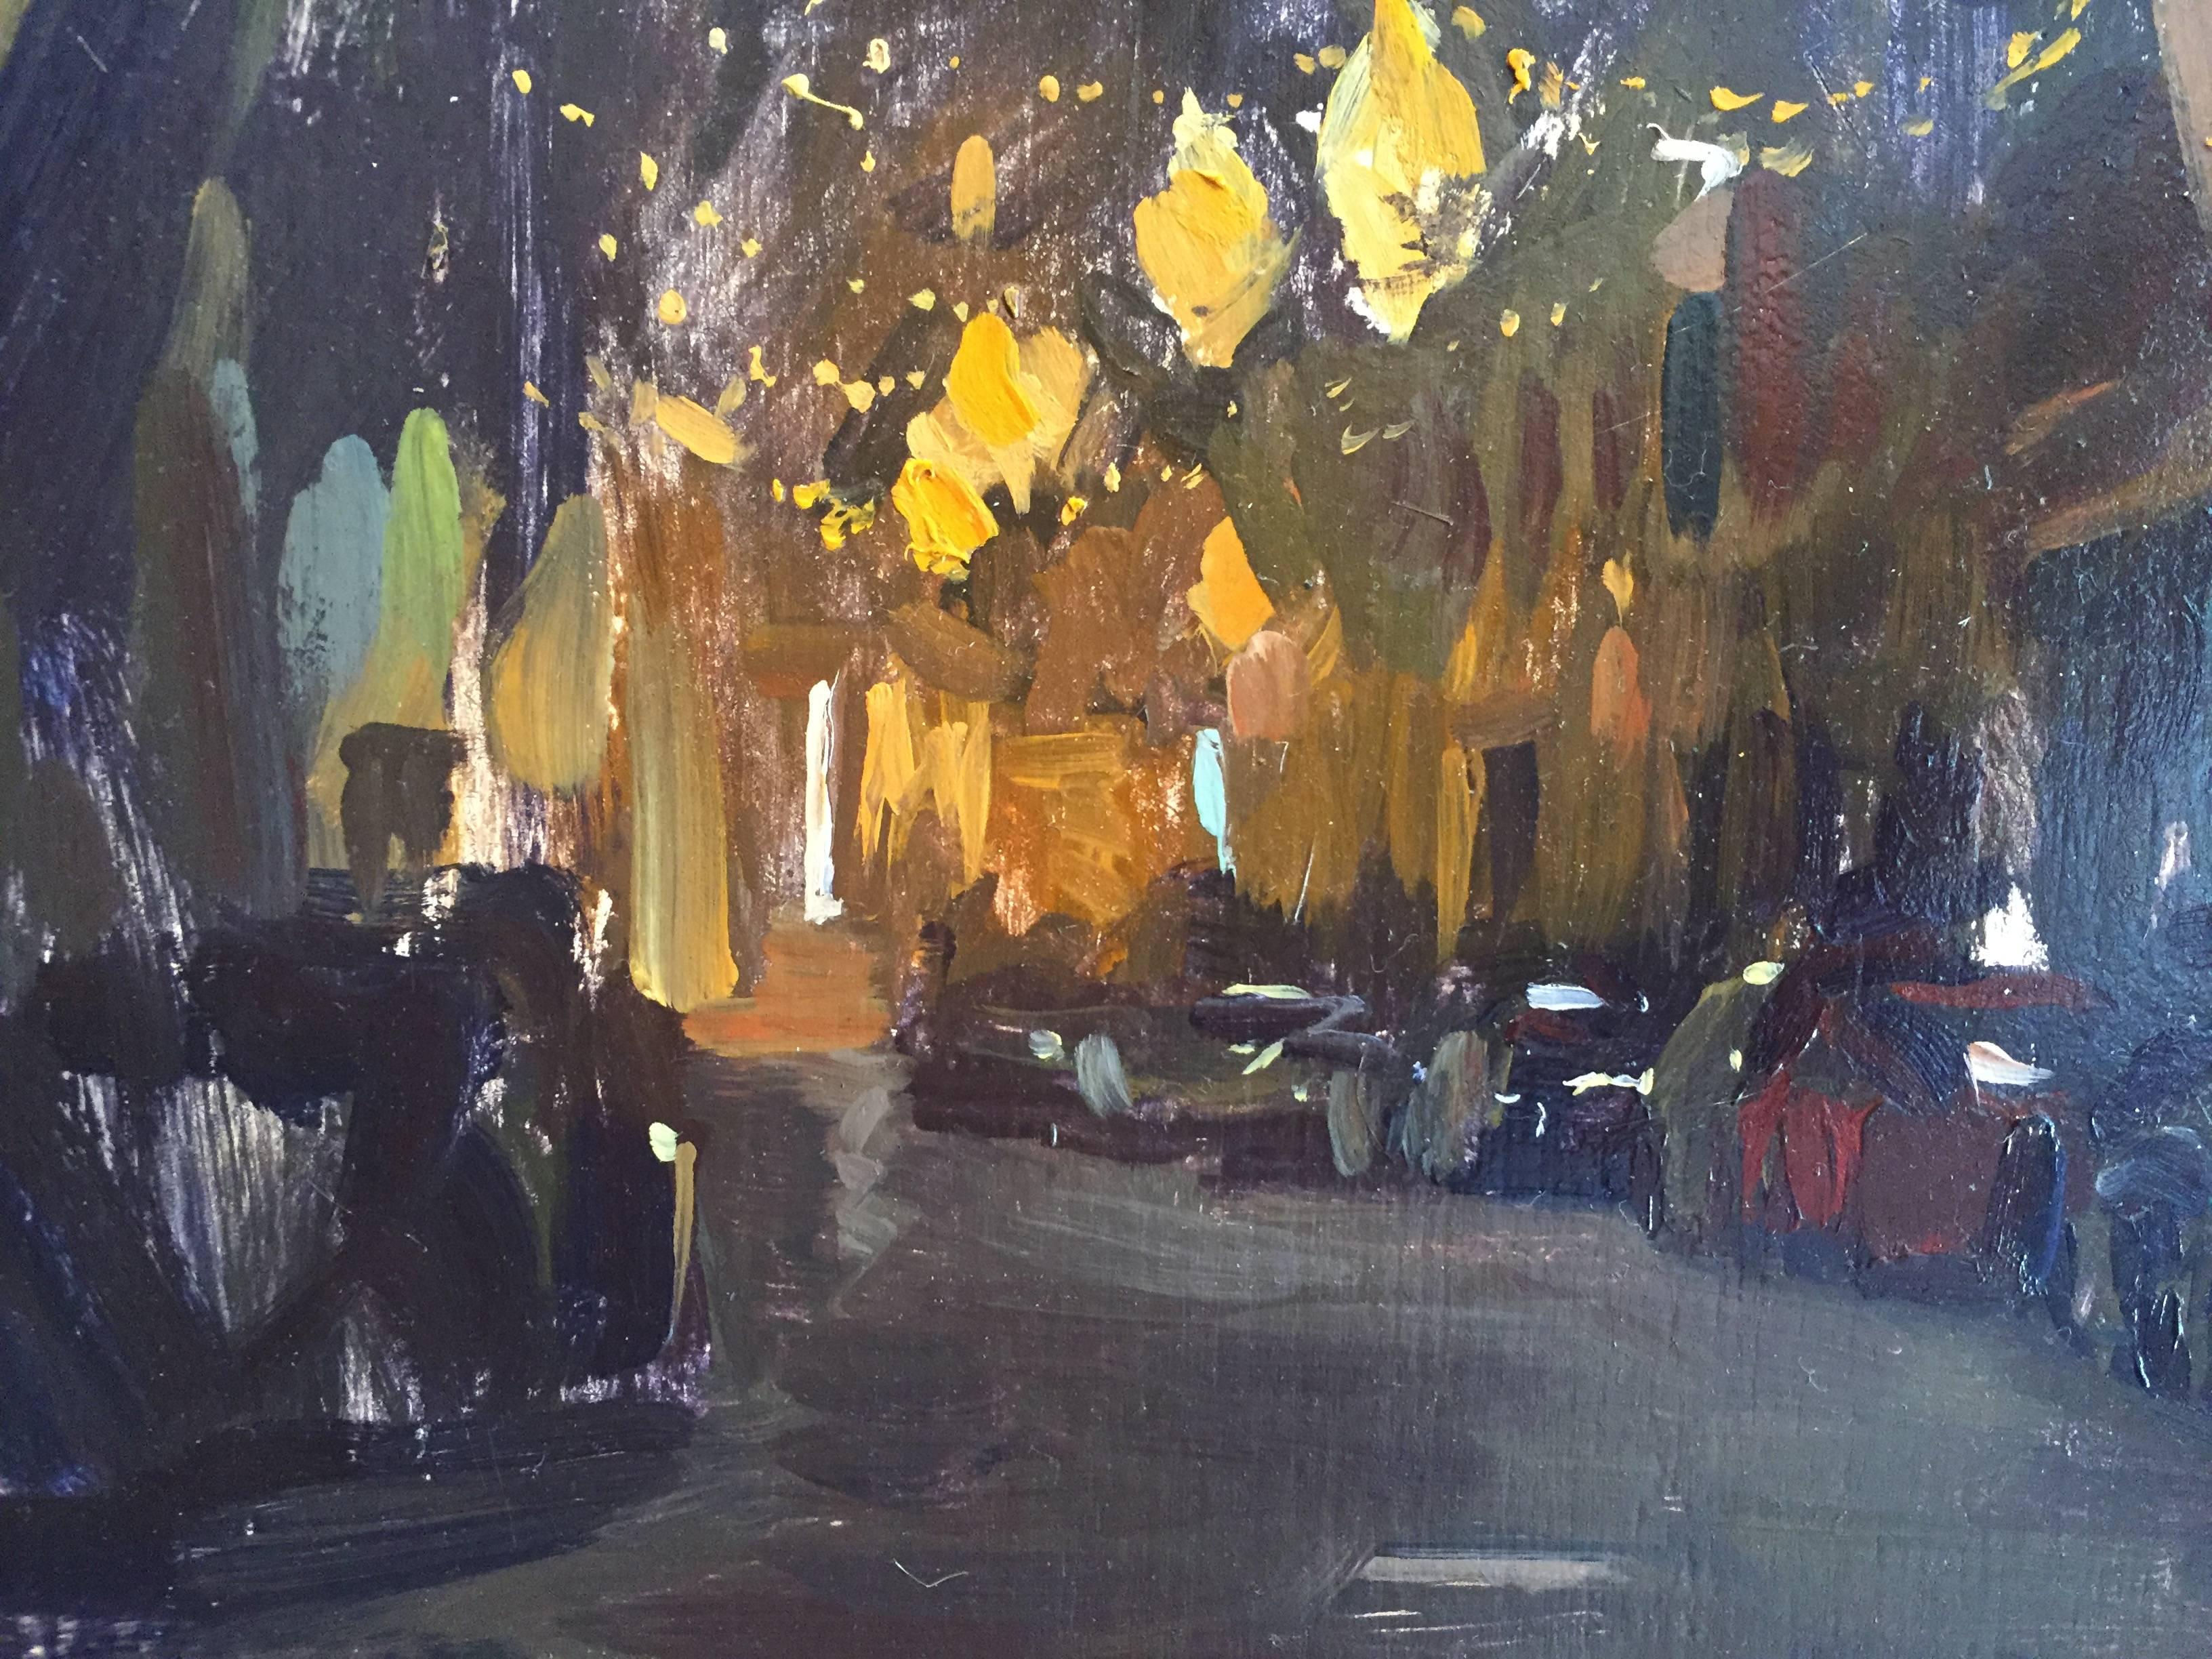 A small oil on panel painting of a European street-scene at night. 

Marc Dalessio was born in 1972 in Los Angeles, California. Even in his earliest years, it was evident that his passion was art. In 1989 he started at the University of California